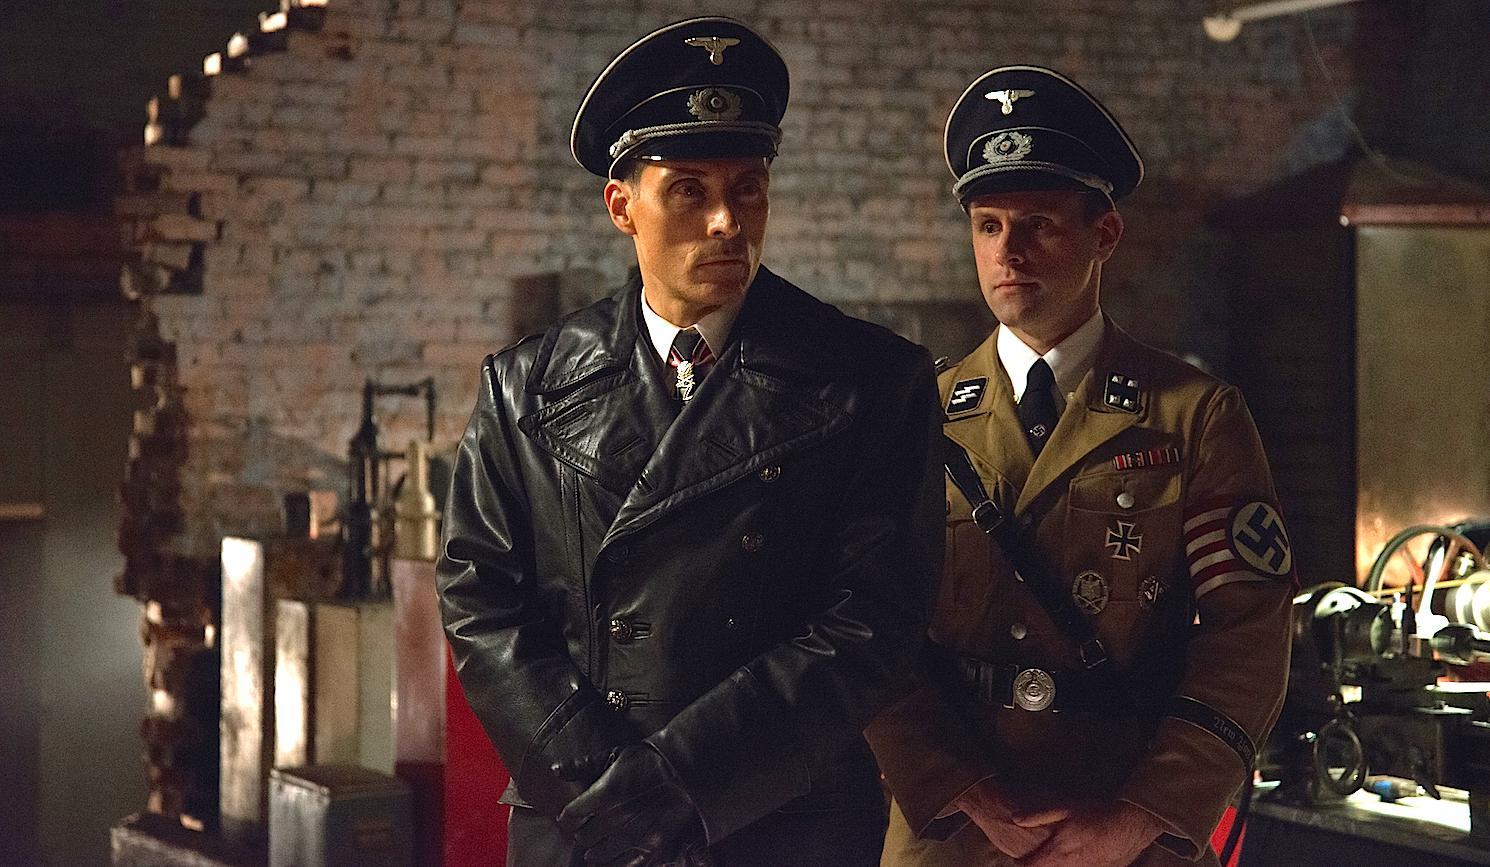 Amazon’s ‘Man in the High Castle’: Executive Producer Frank Spotnitz Discusses Nazi Occupation